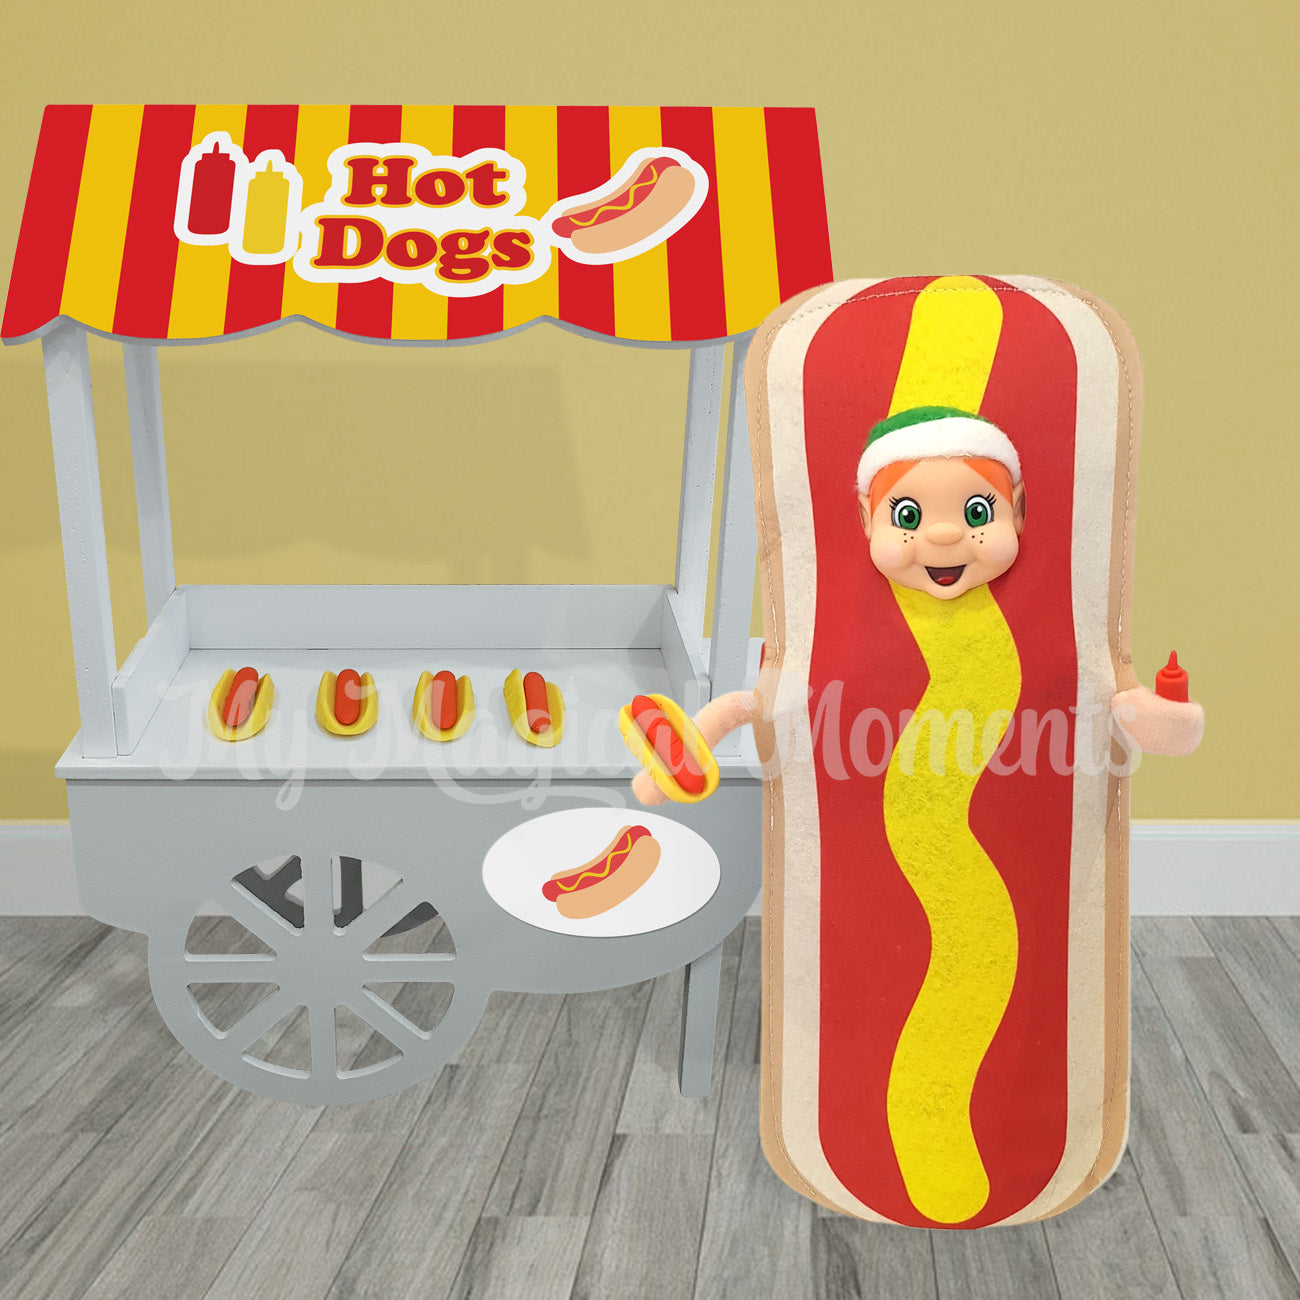 Elf dressed as hot dog, holding a miniature hot dog selling food from her stand